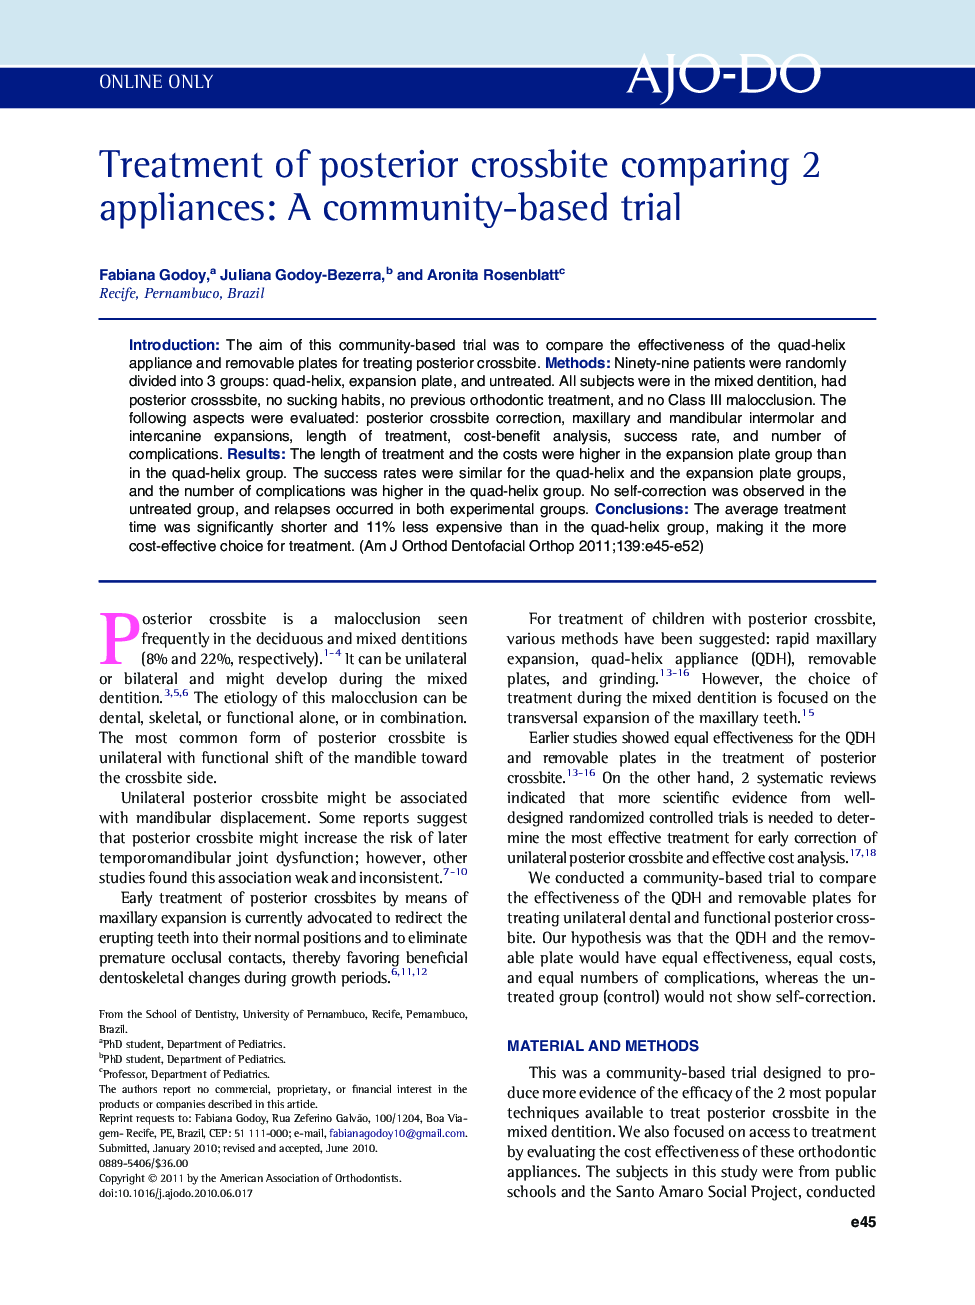 Treatment of posterior crossbite comparing 2 appliances: A community-based trial 